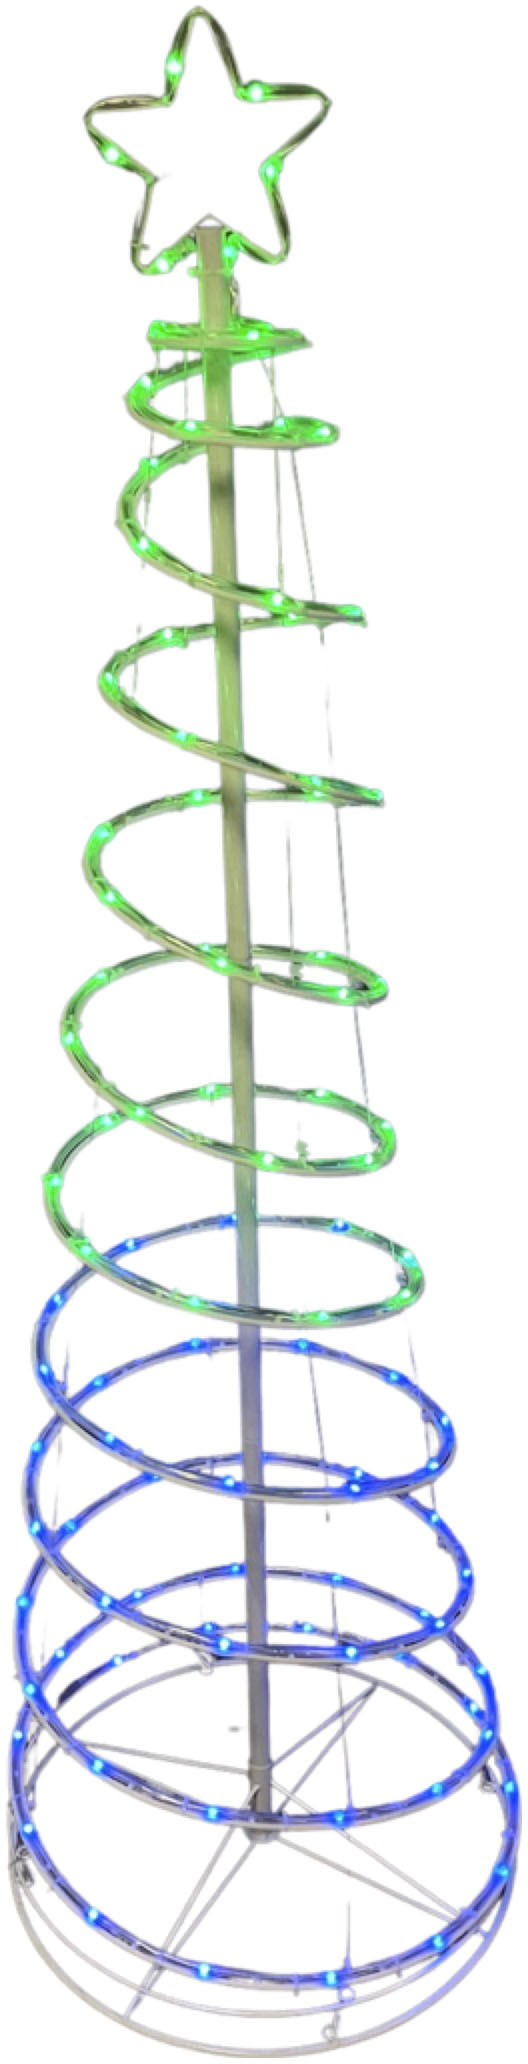 Charm Holiday - Outdoor Lit LED Outdoor Spiral Christmas Tree - Multi